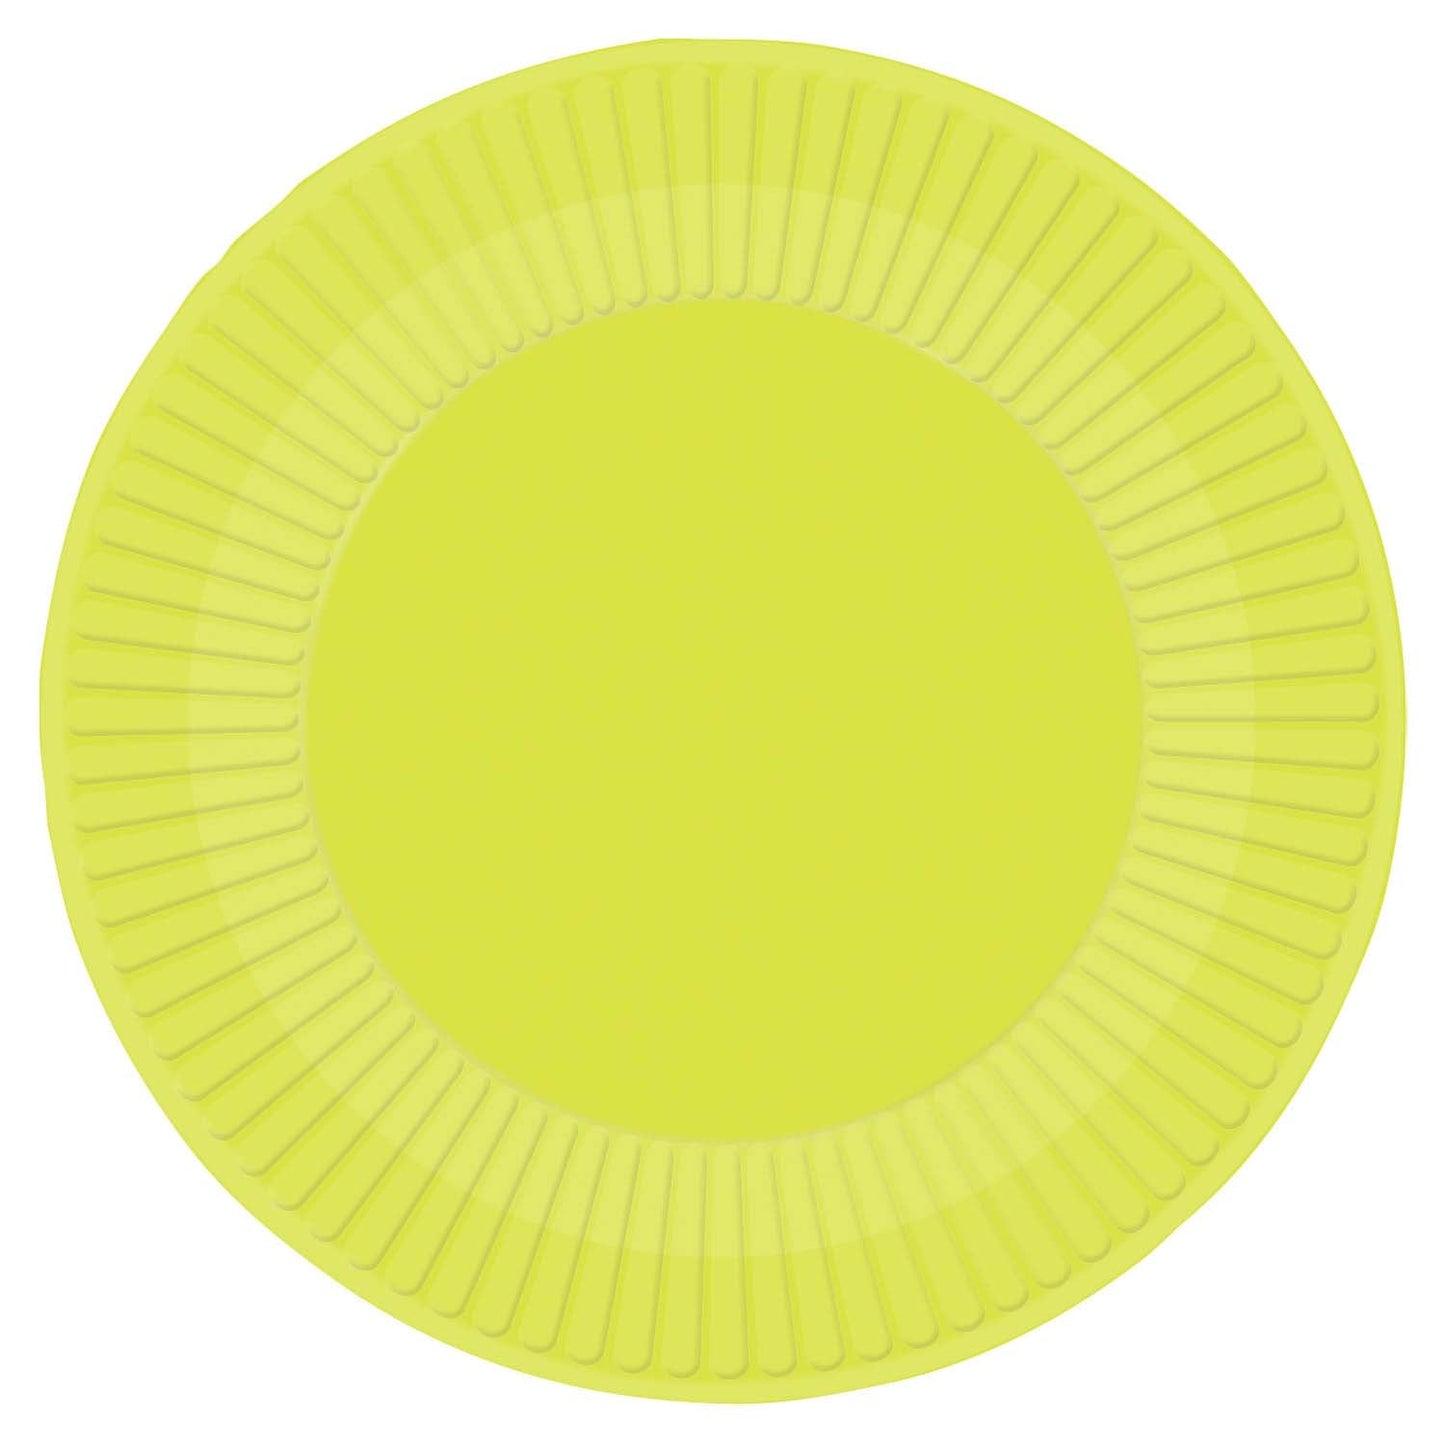 Lime Cordial Paper Plates, 23cm, Pack of 8